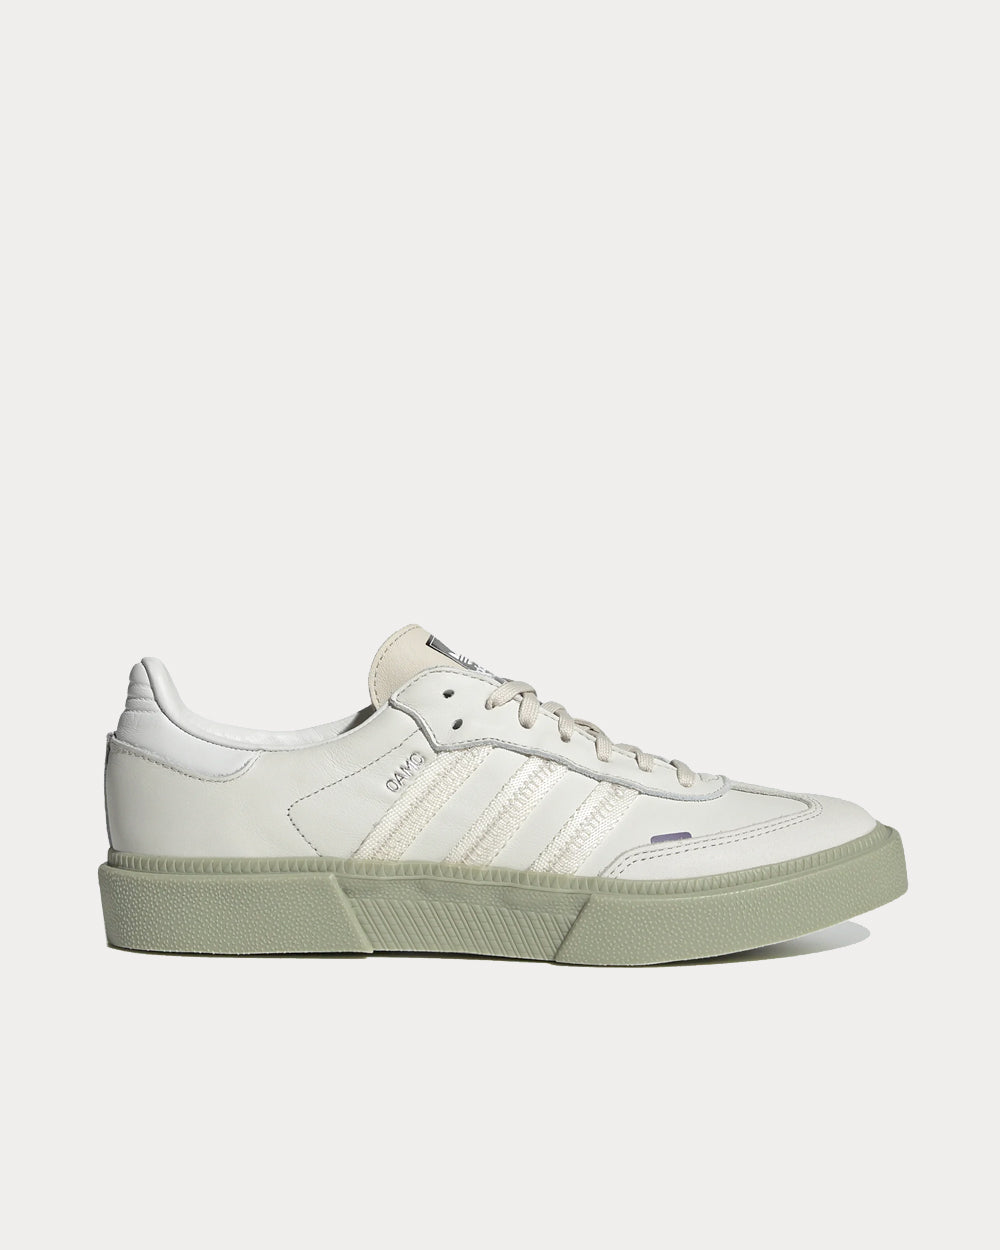 Adidas x OAMC Type 0-9 White Tint Low Top Sneakers - Sneak in Peace